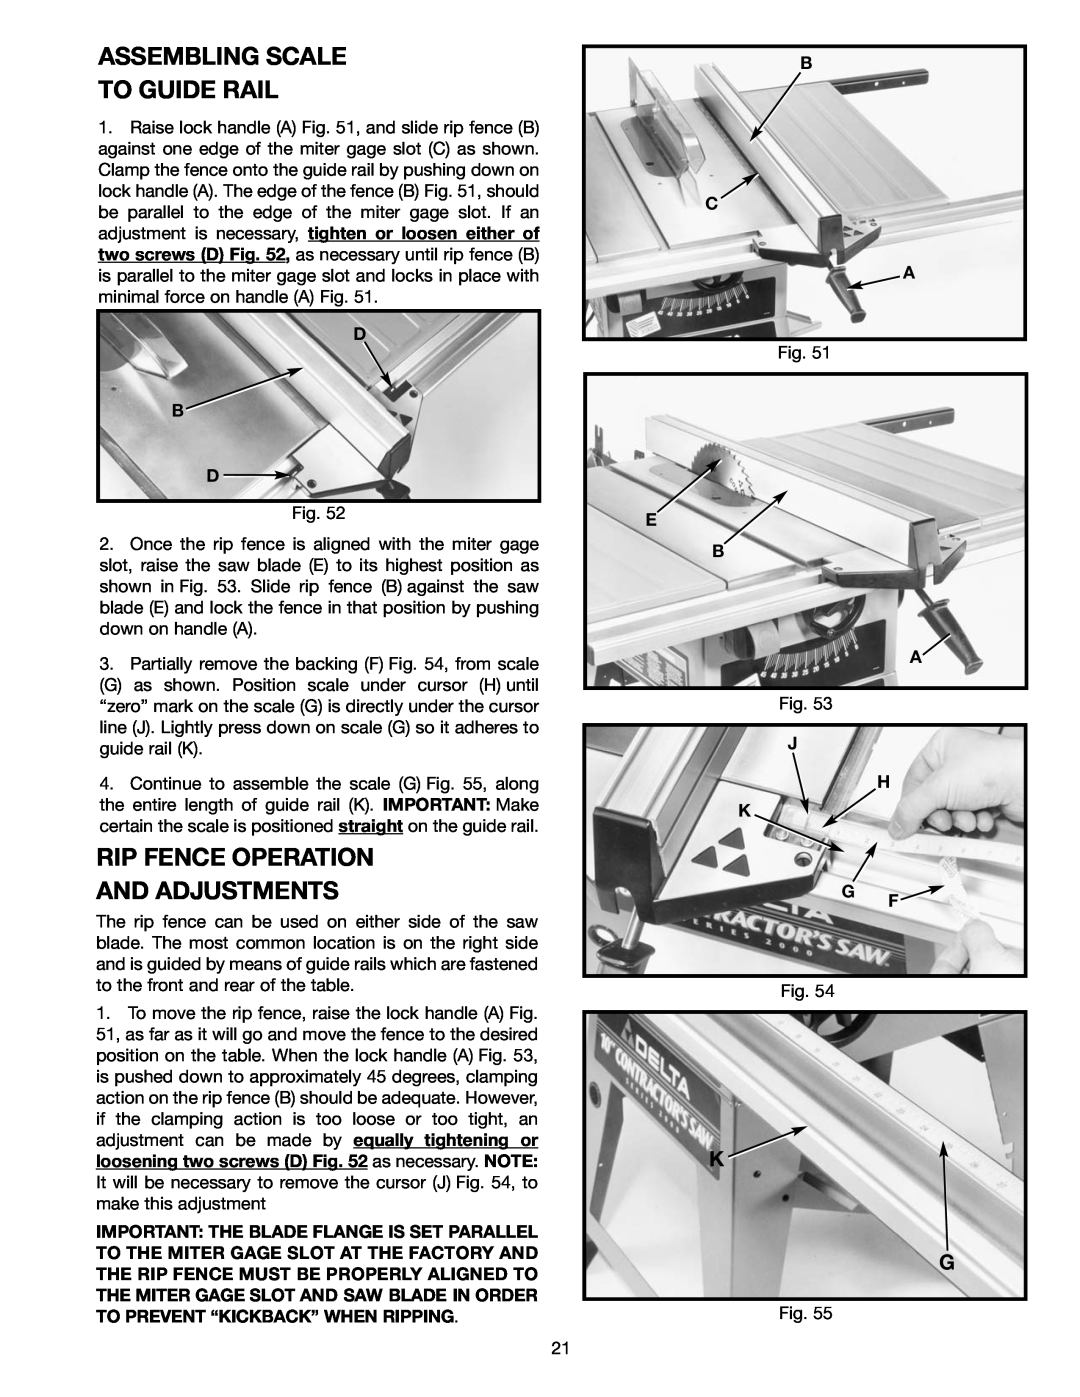 Delta 36-465 Assembling Scale To Guide Rail, Rip Fence Operation And Adjustments, D B D, B C A, E B A, J H K G F 